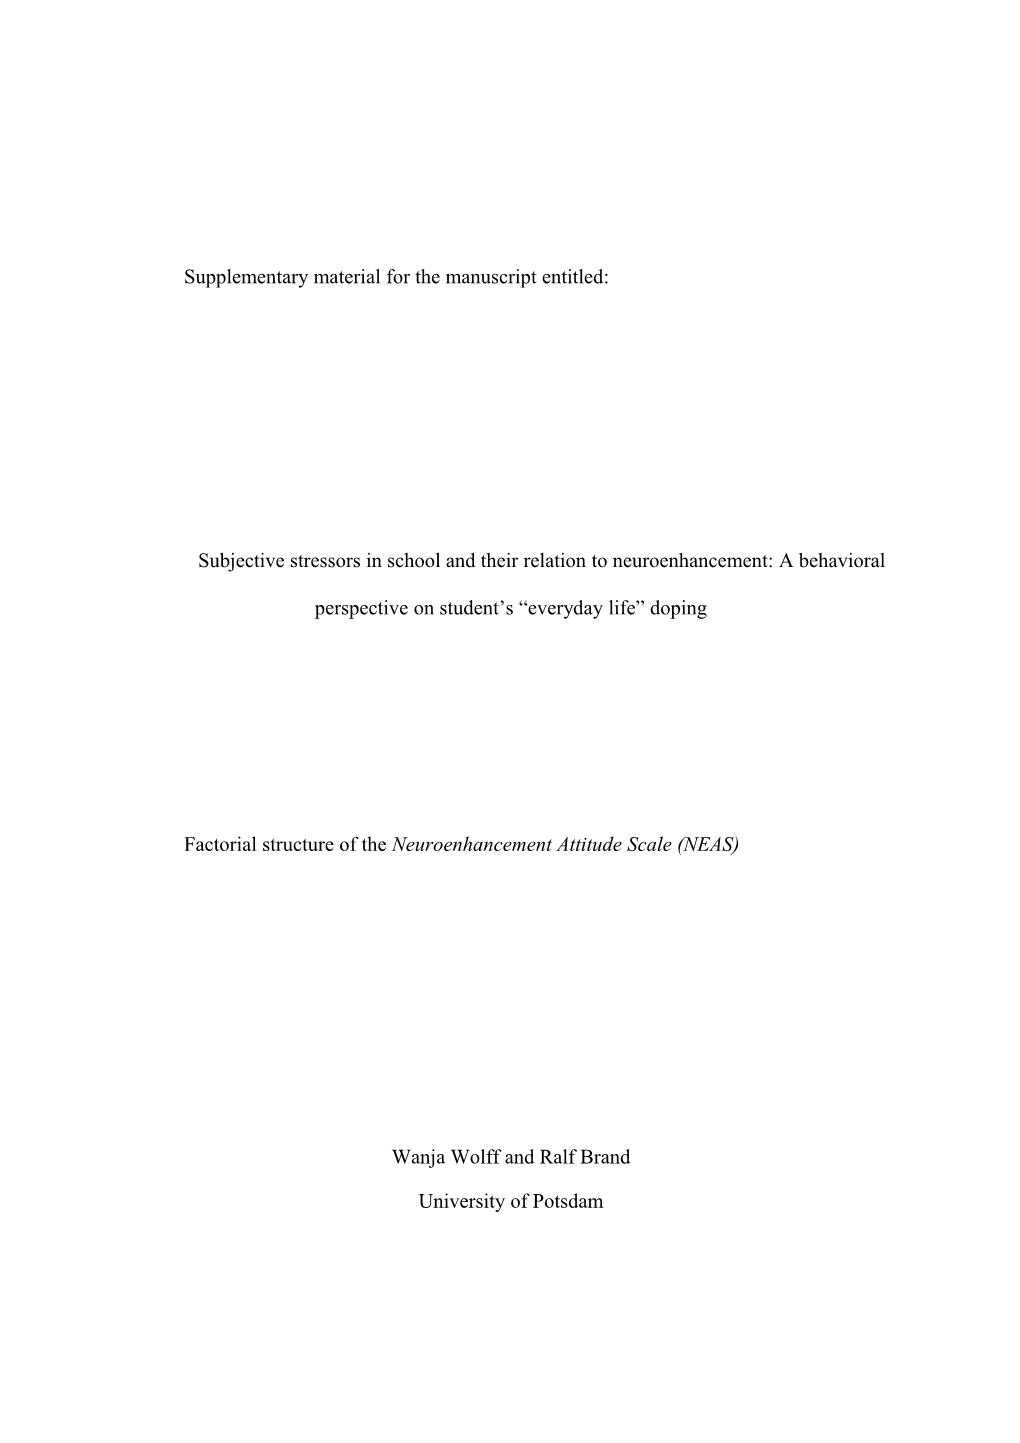 Supplementary Material for the Manuscript Entitled